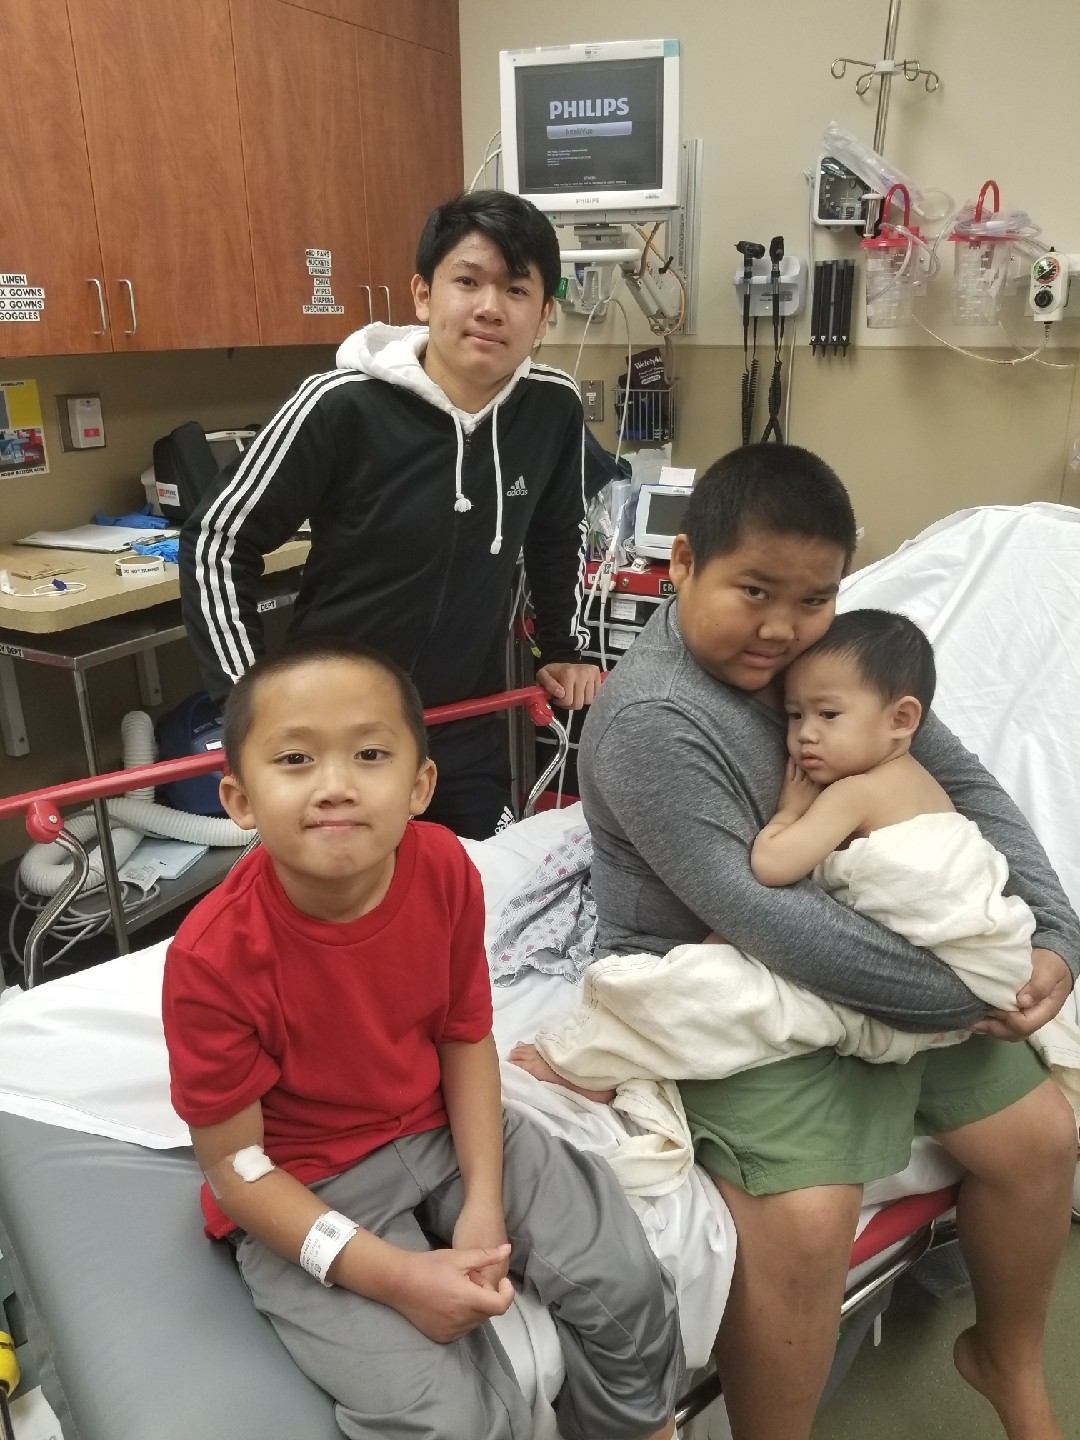 The Phommathep brothers of Rancho Tehama. Jake, 6, in the red shirt, was shot in the foot. John Jr.